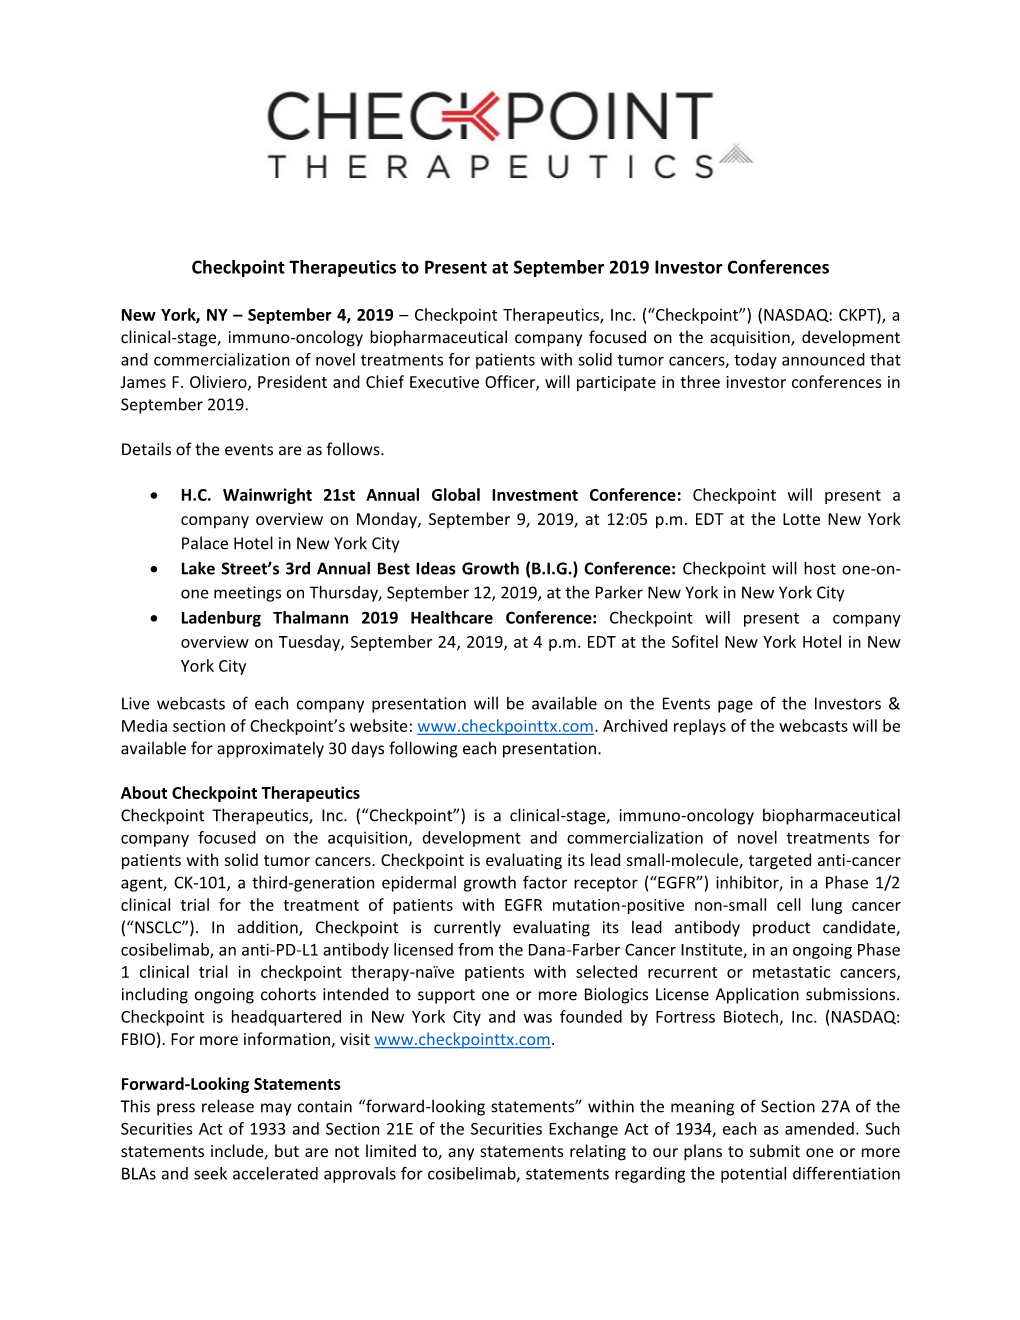 Checkpoint Therapeutics to Present at September 2019 Investor Conferences